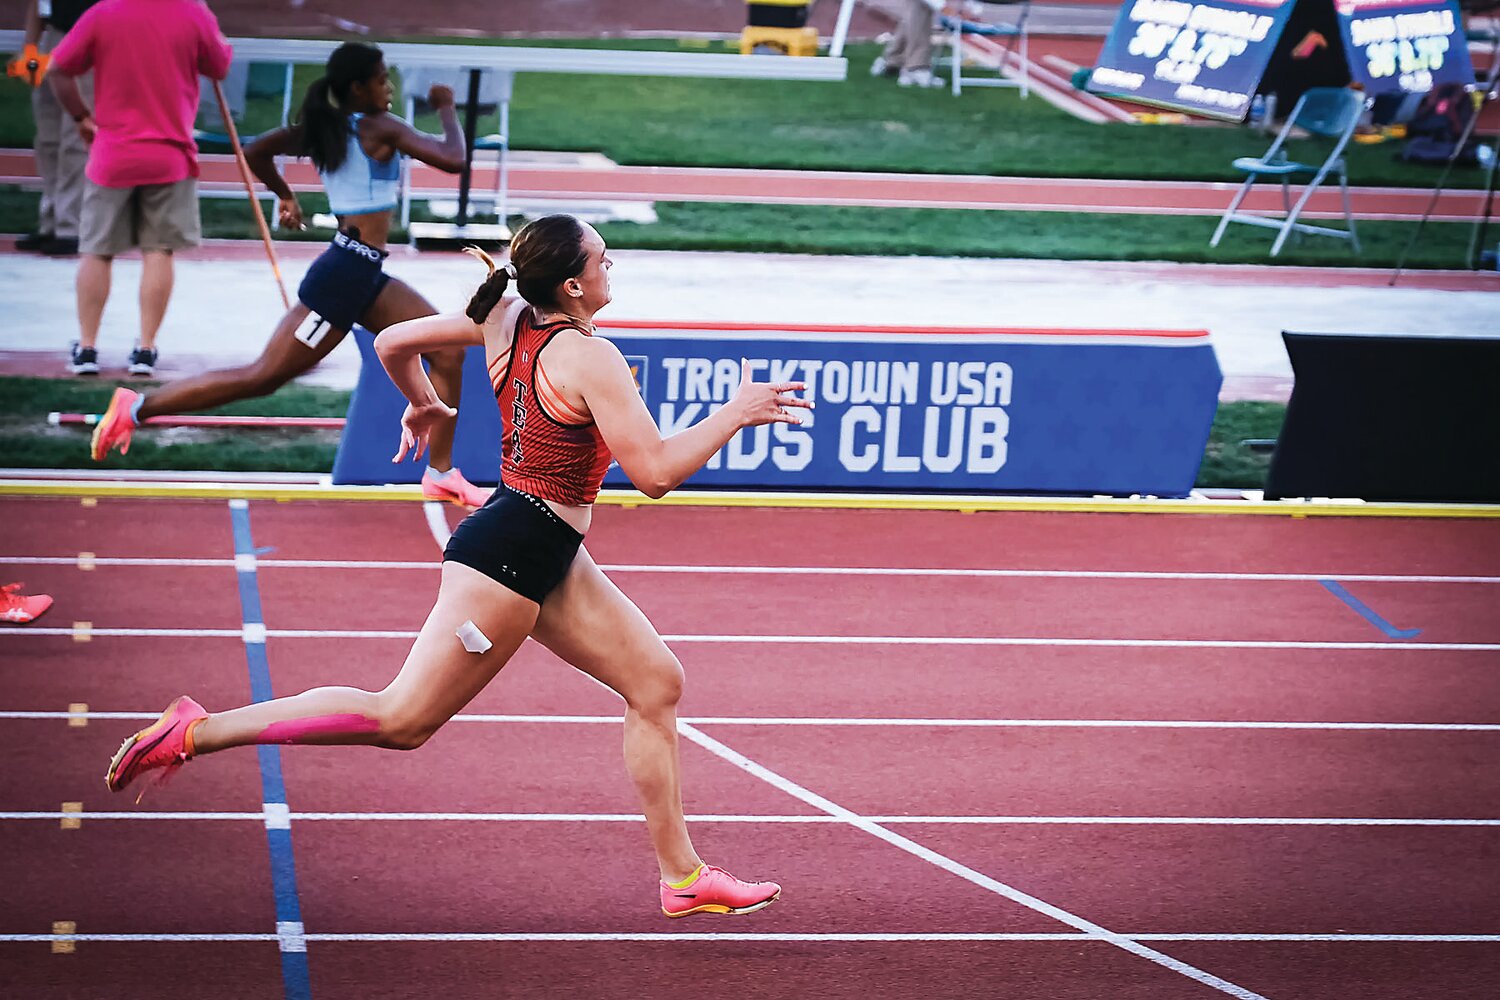 Fiona McKenna out leans her competition to finish  third overall in the 200-meter run at the USA Track & Field (USATF) Junior Olympic National Championships.